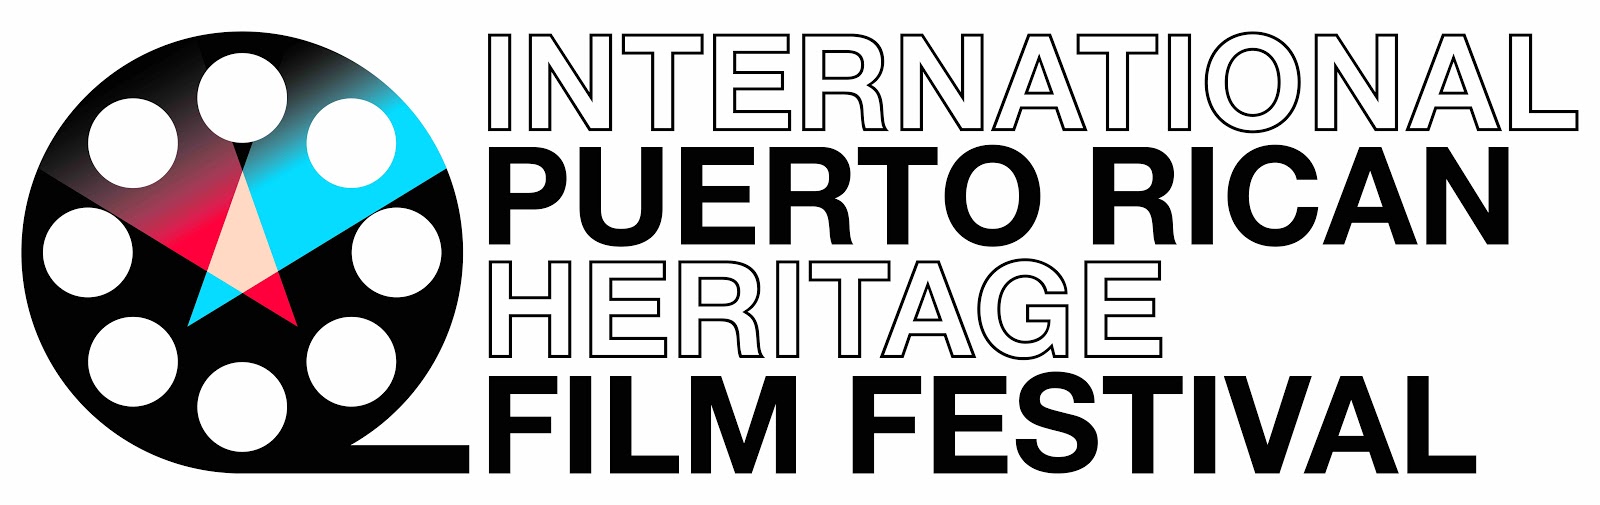 International Puerto Rican Heritage Film Festival written in black, bold letters next to a film reel graphic.